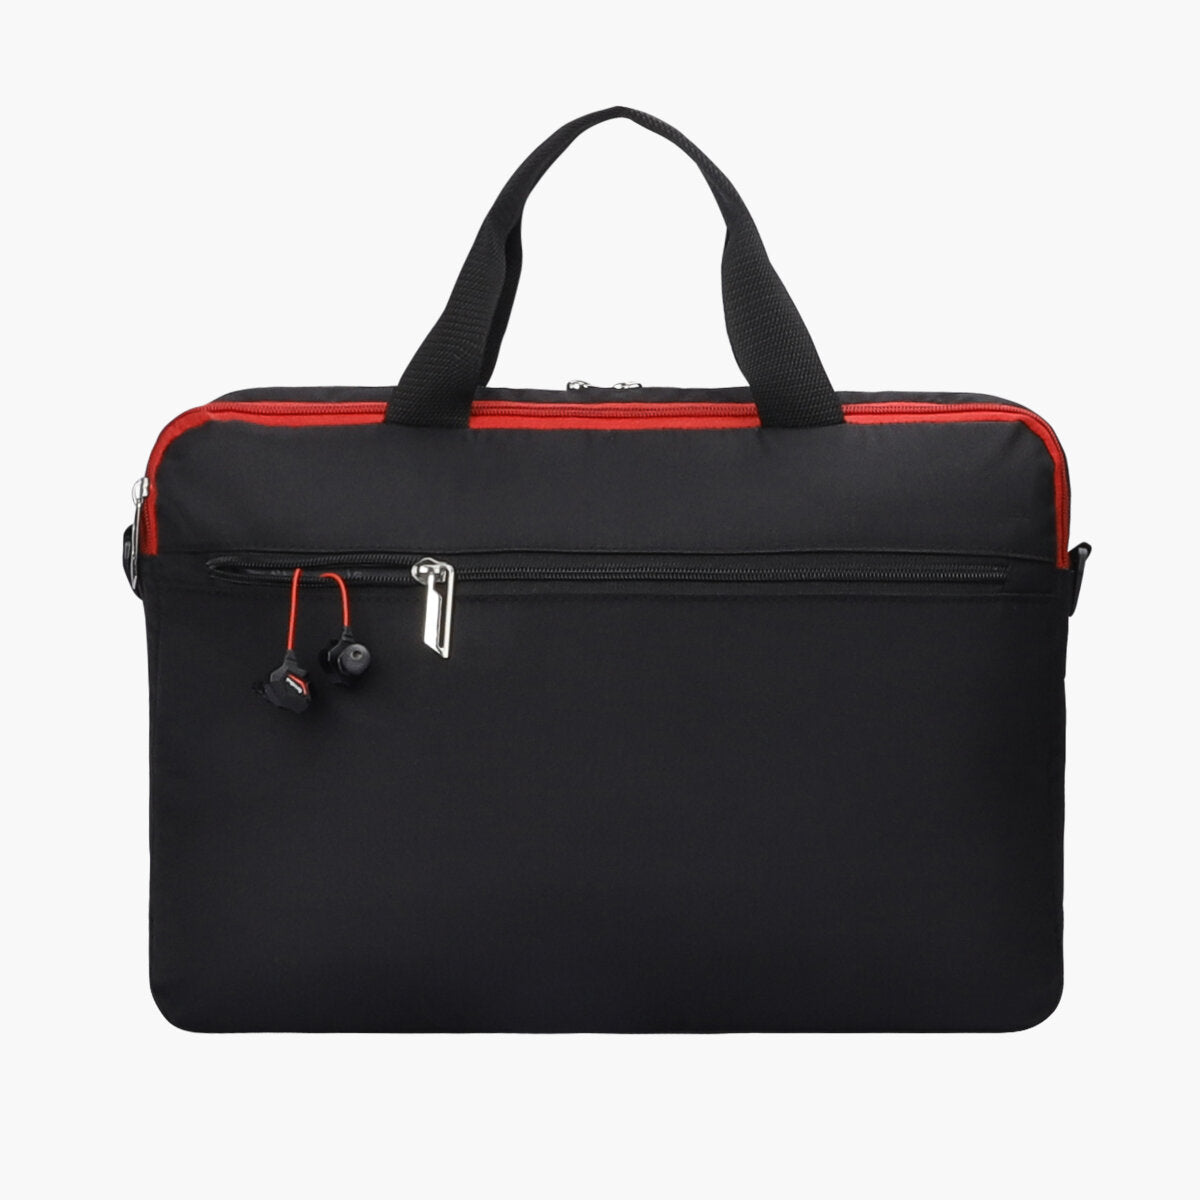 Black Red | Protecta Organised Chaos 2.0 Office Laptop Bag - 6